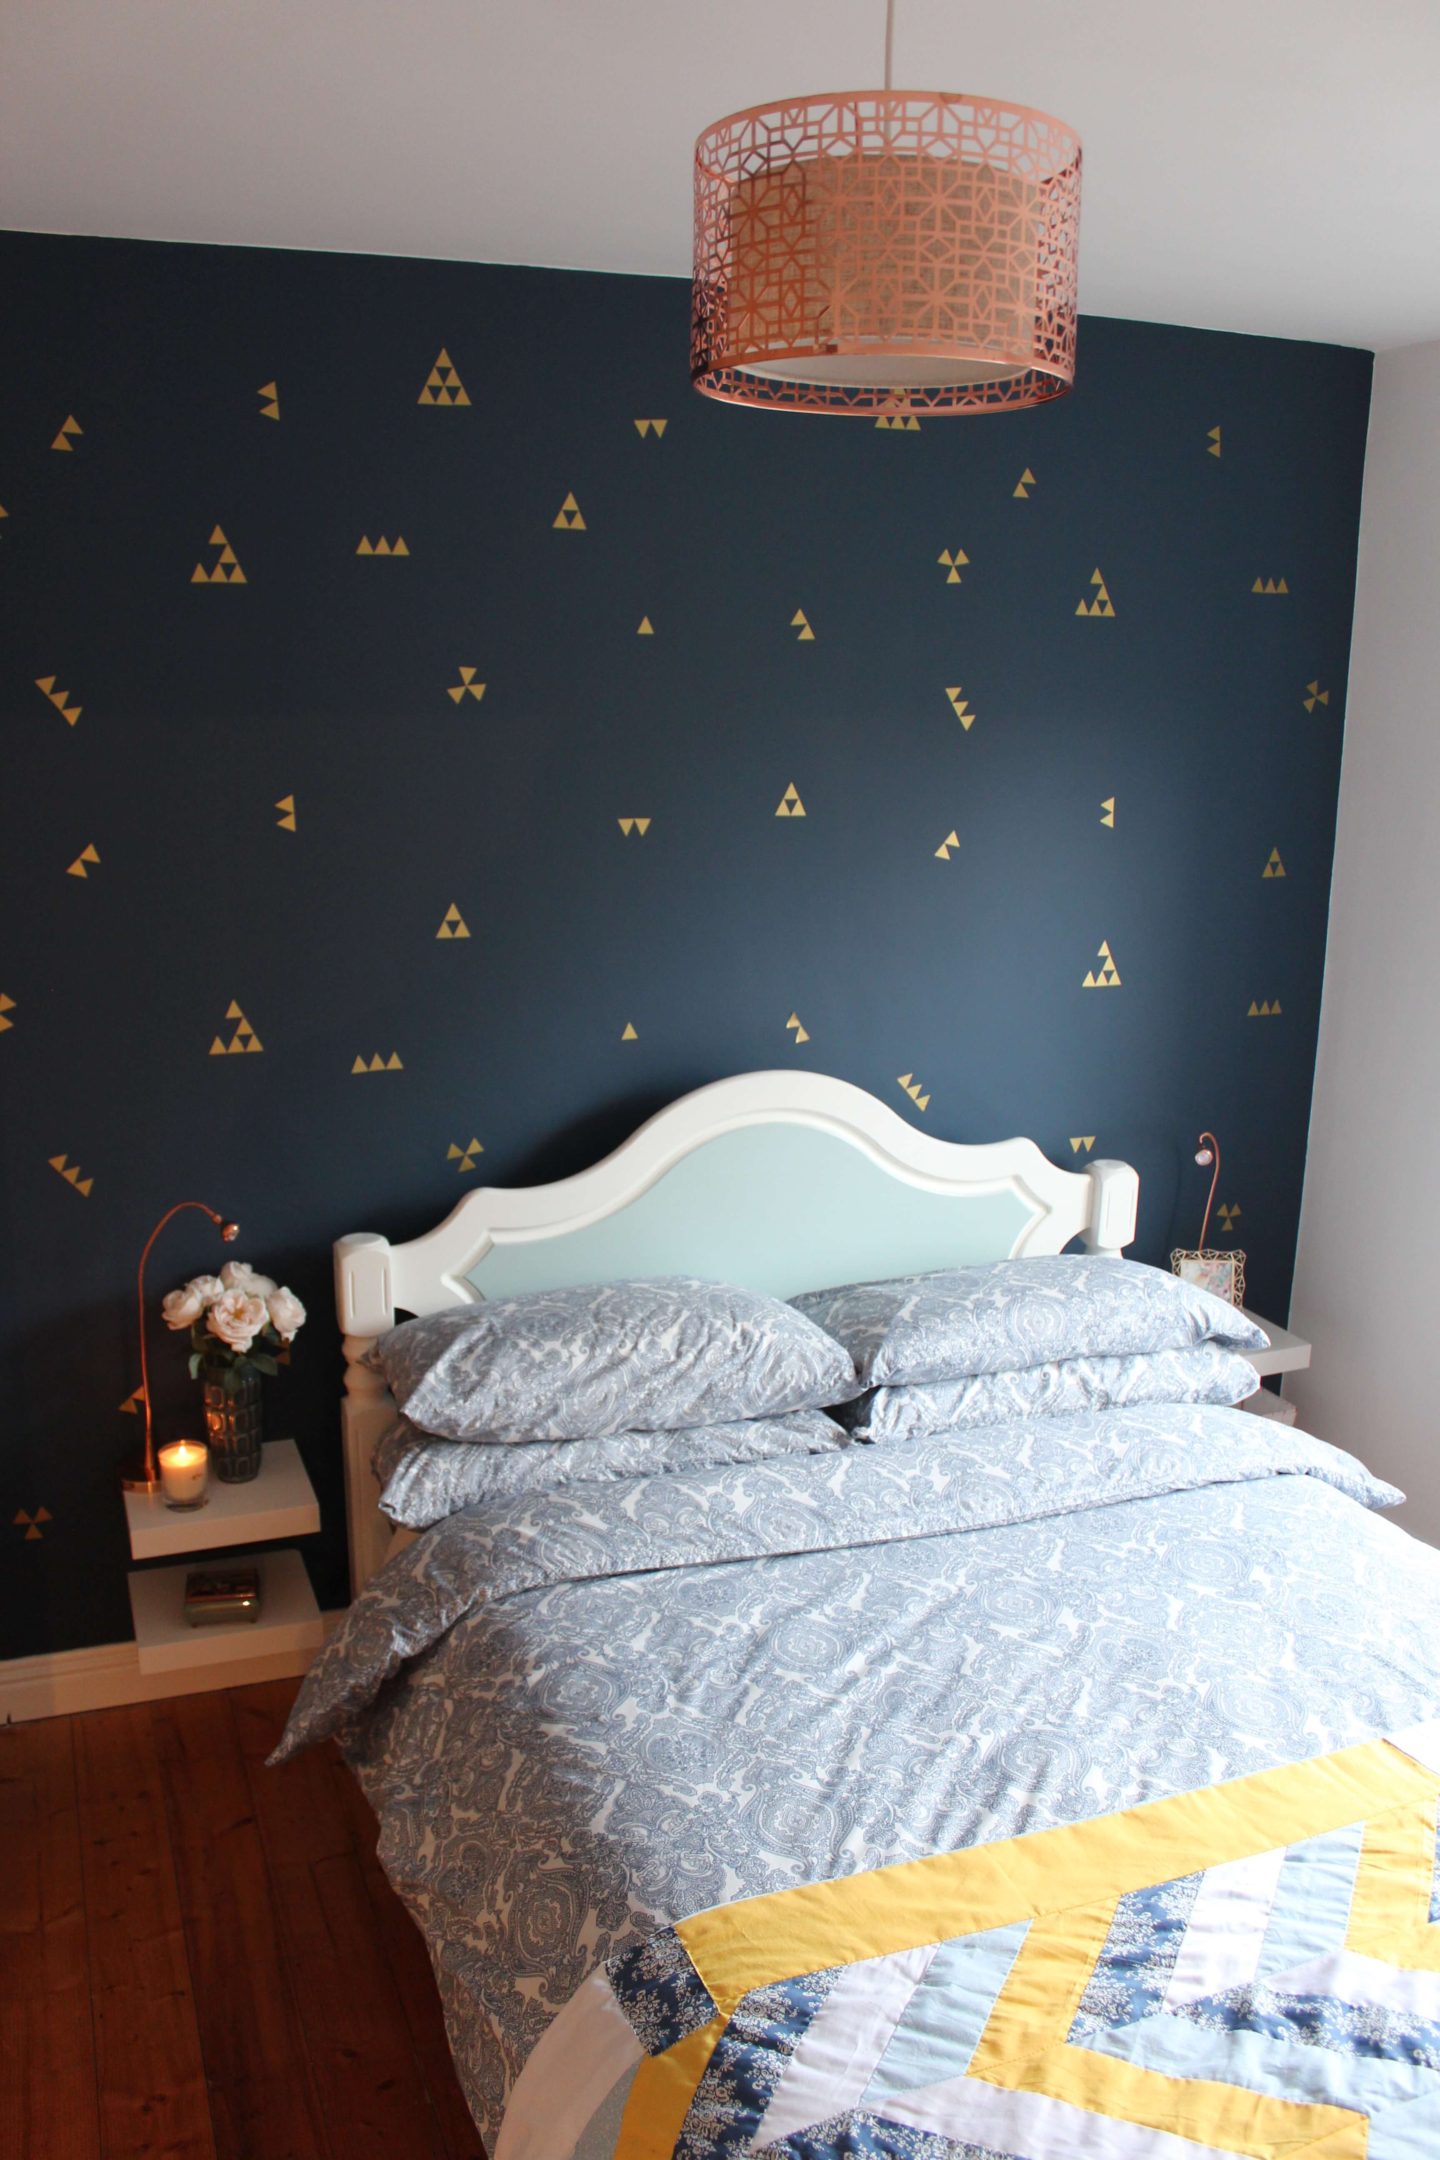 A reveal guestroom photo of a painted white and duckegg bed, set against a navy wall with gold decals.